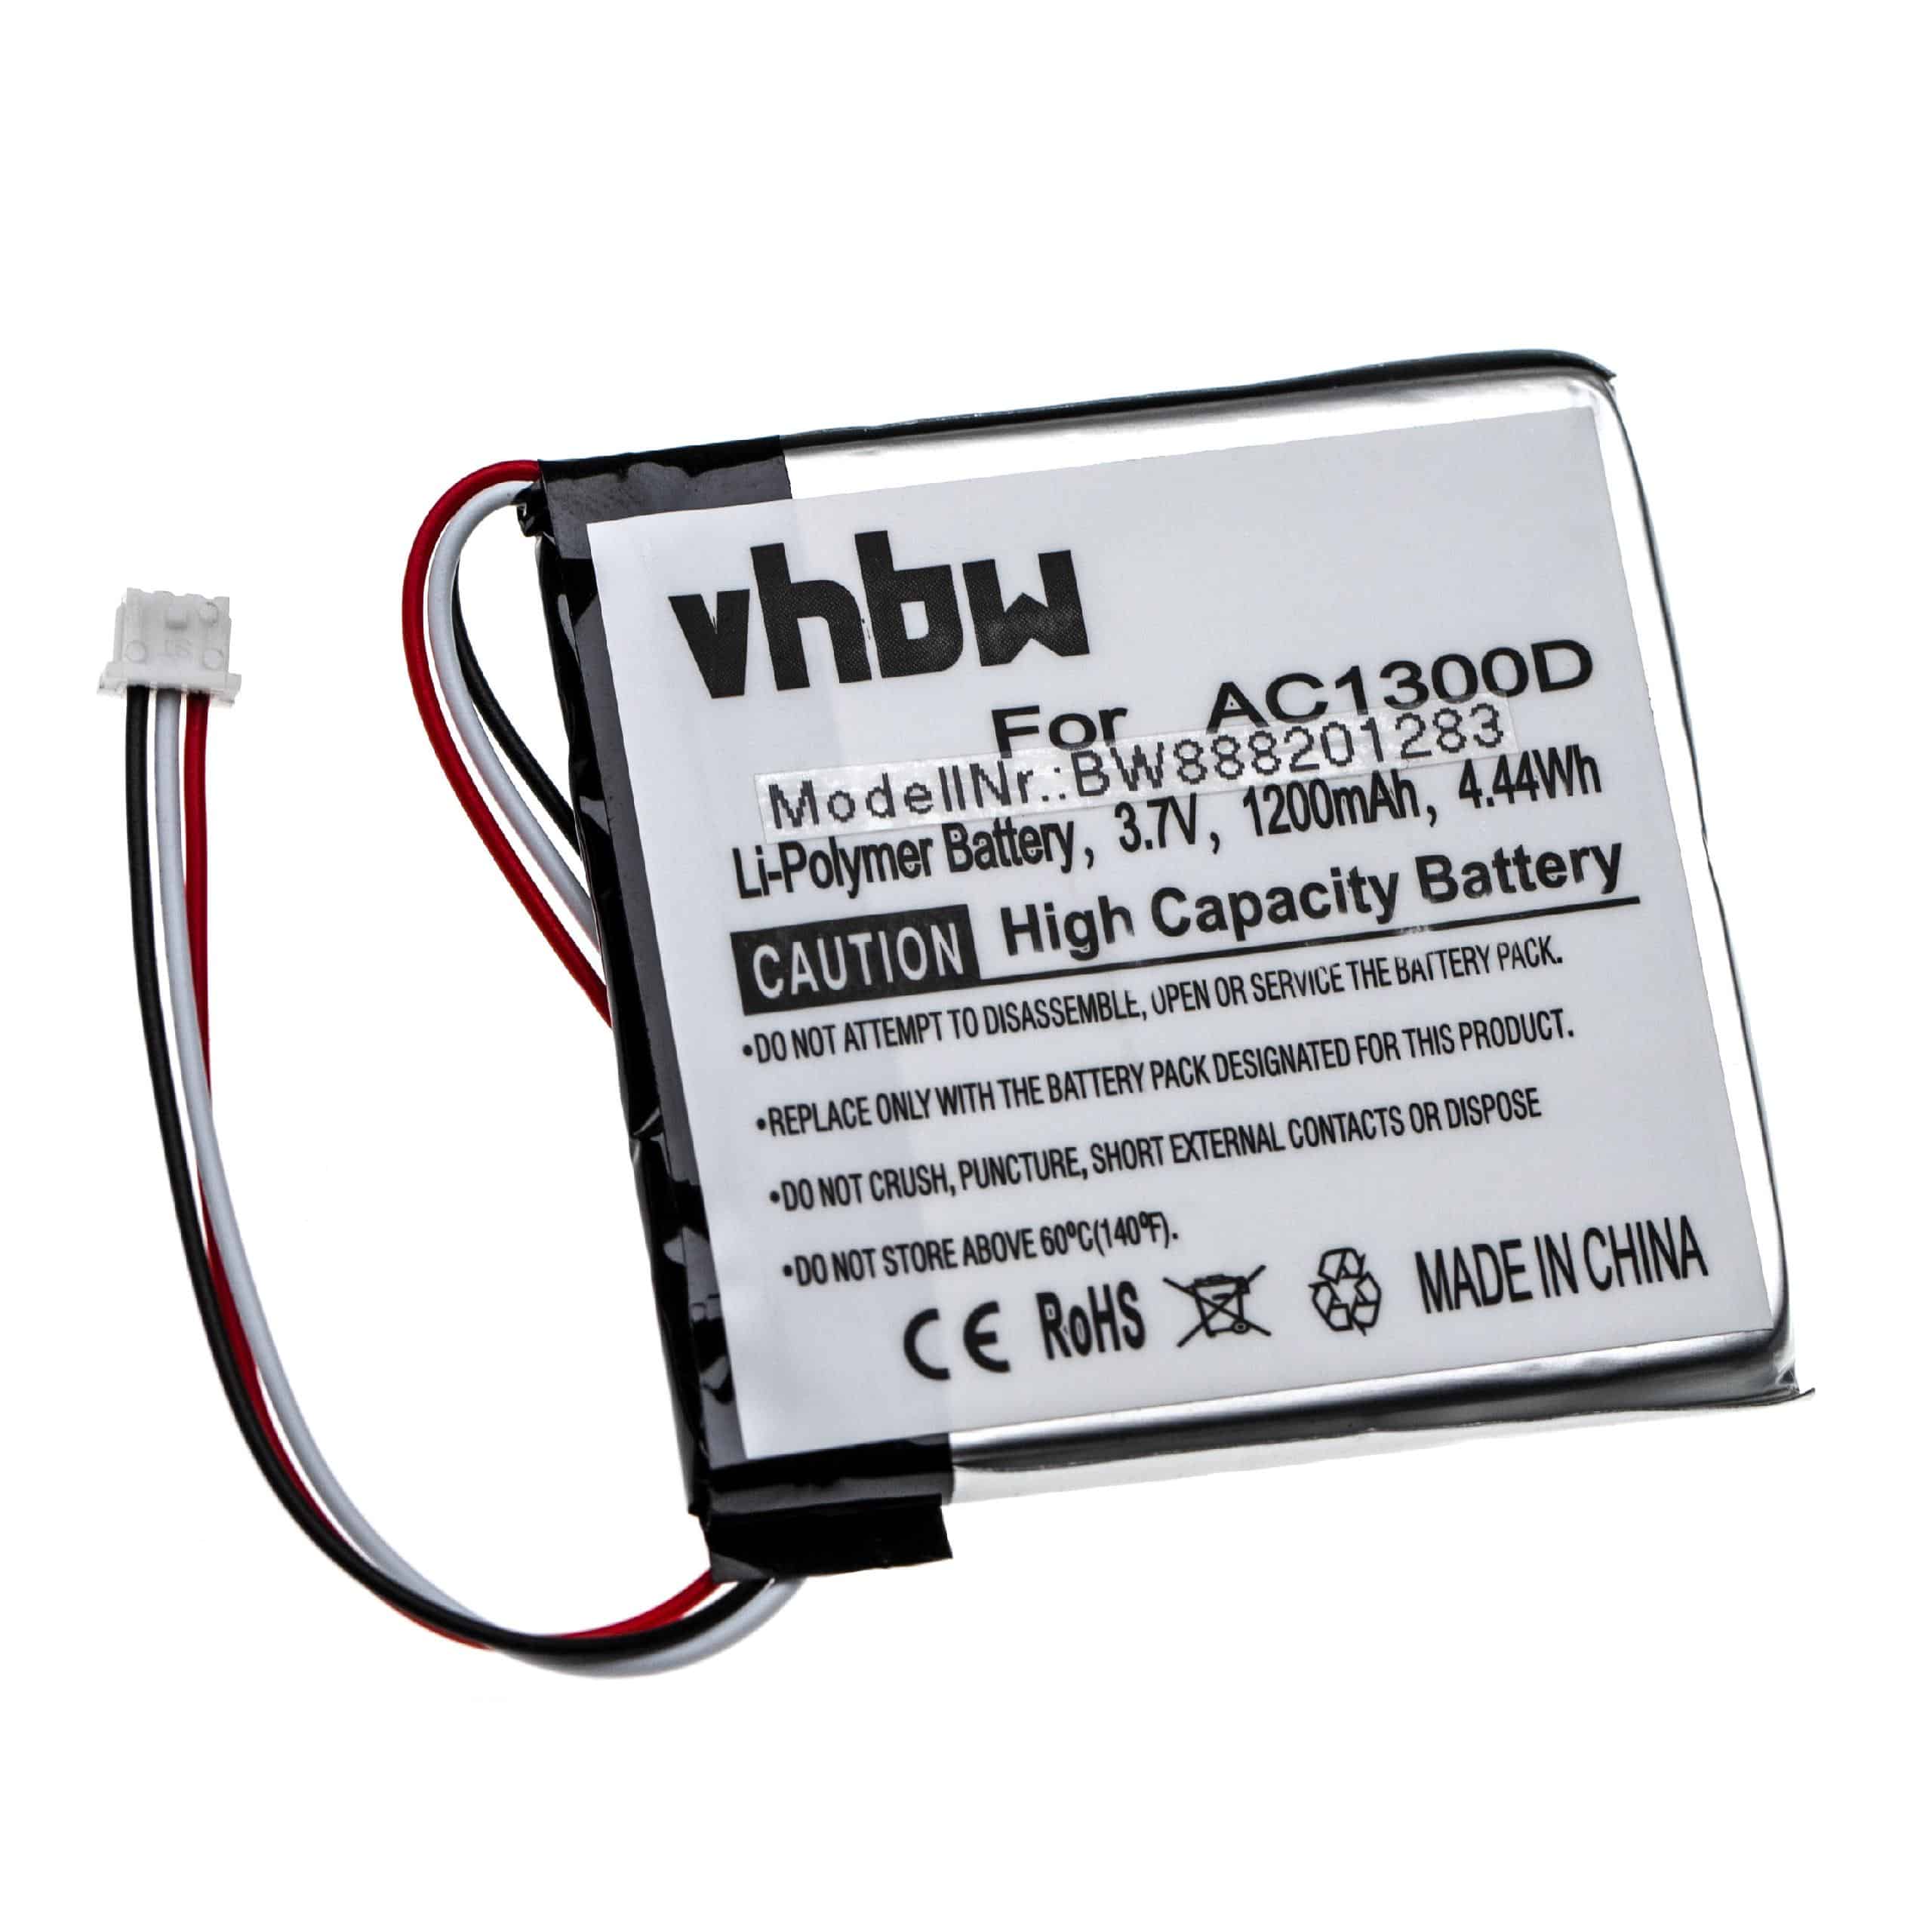 Baby Monitor Battery for Angelcare AC1300 parent unit, AC1300-D parent unit, AC1320 parent unit - 1200mAh 3.7V